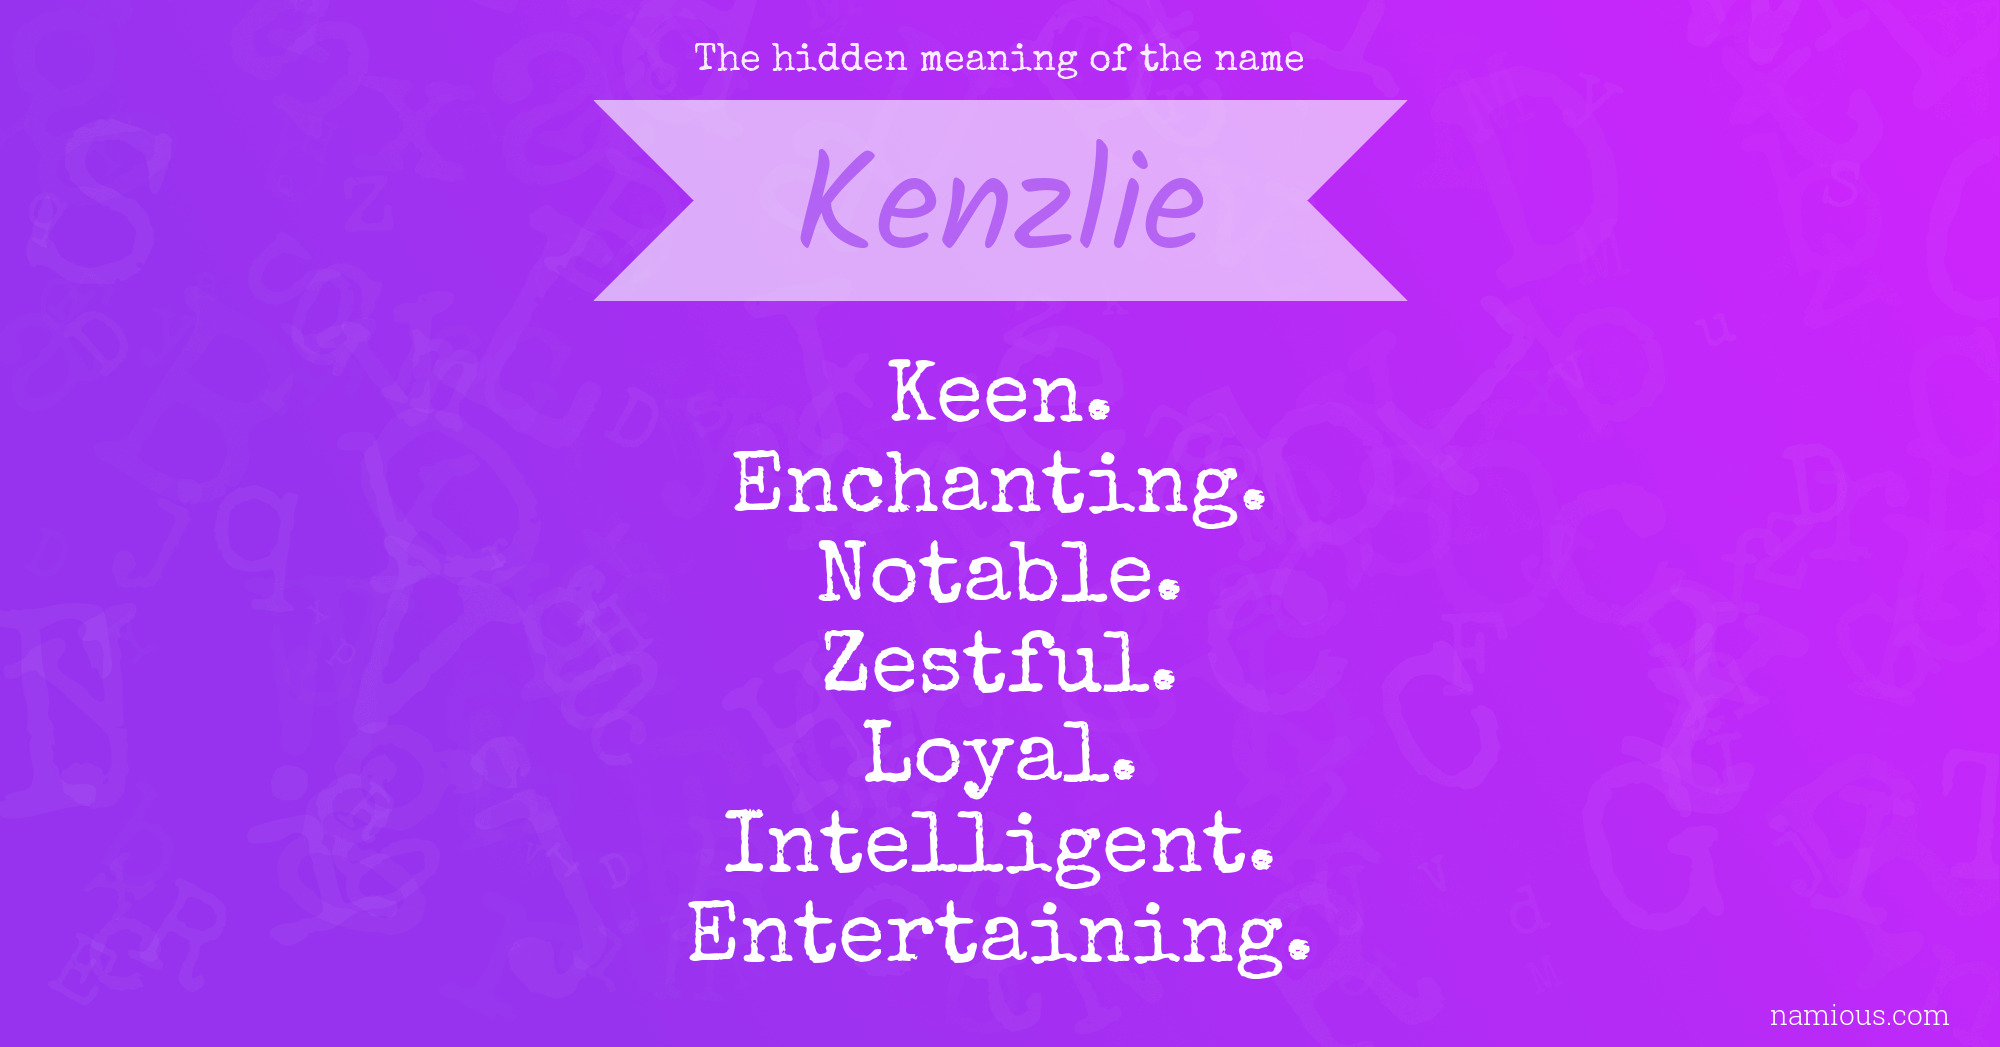 The hidden meaning of the name Kenzlie